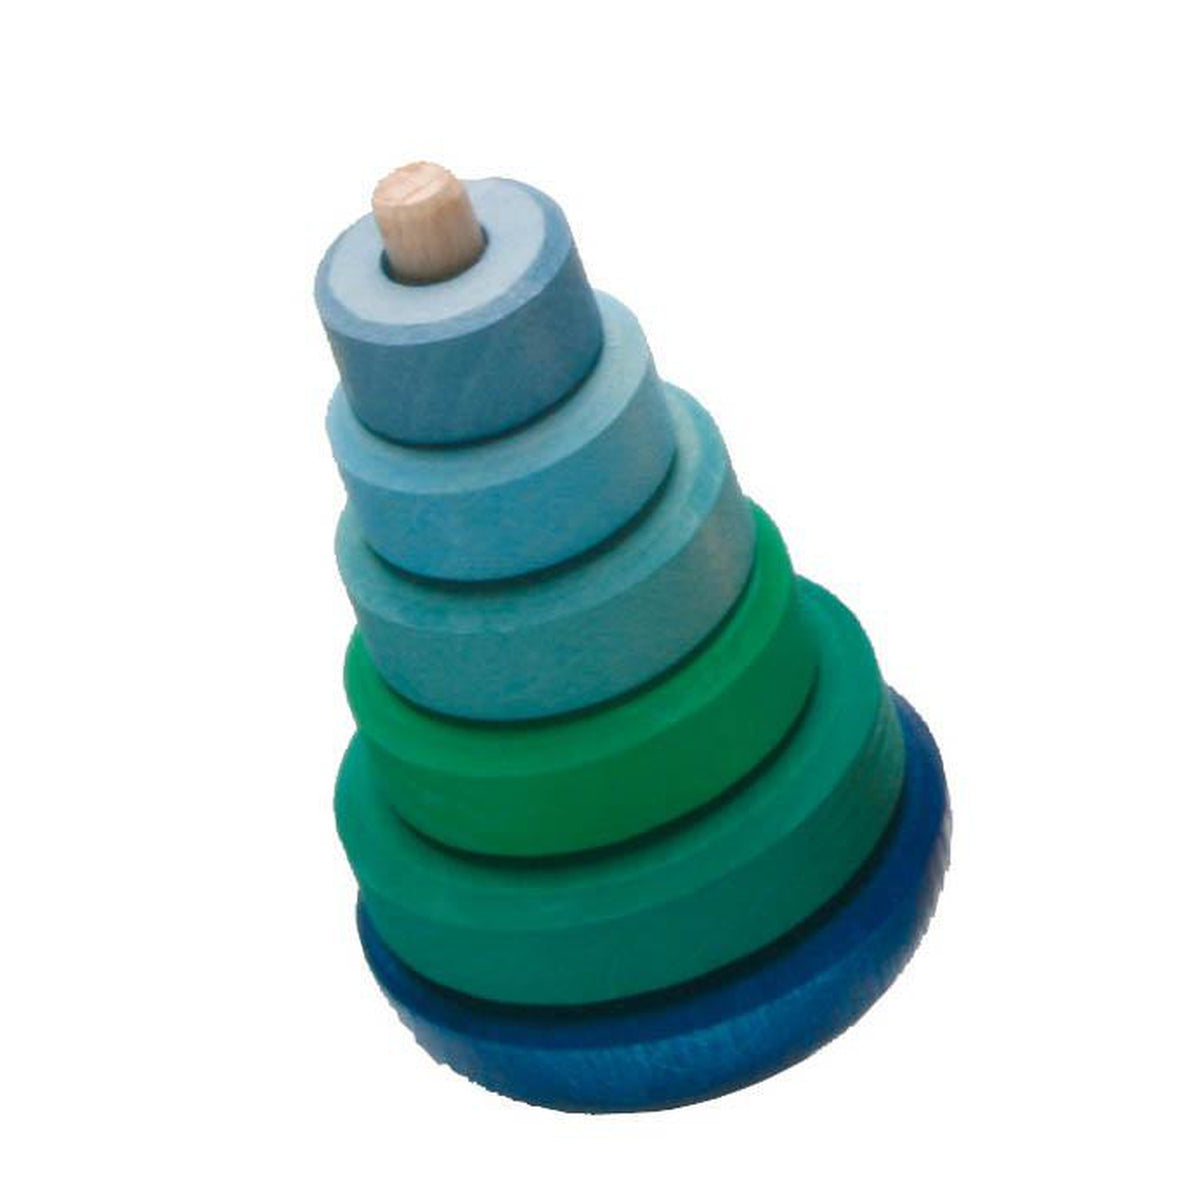 Grimm's wobbly blue stacking tower-baby-Fire the Imagination-Dilly Dally Kids